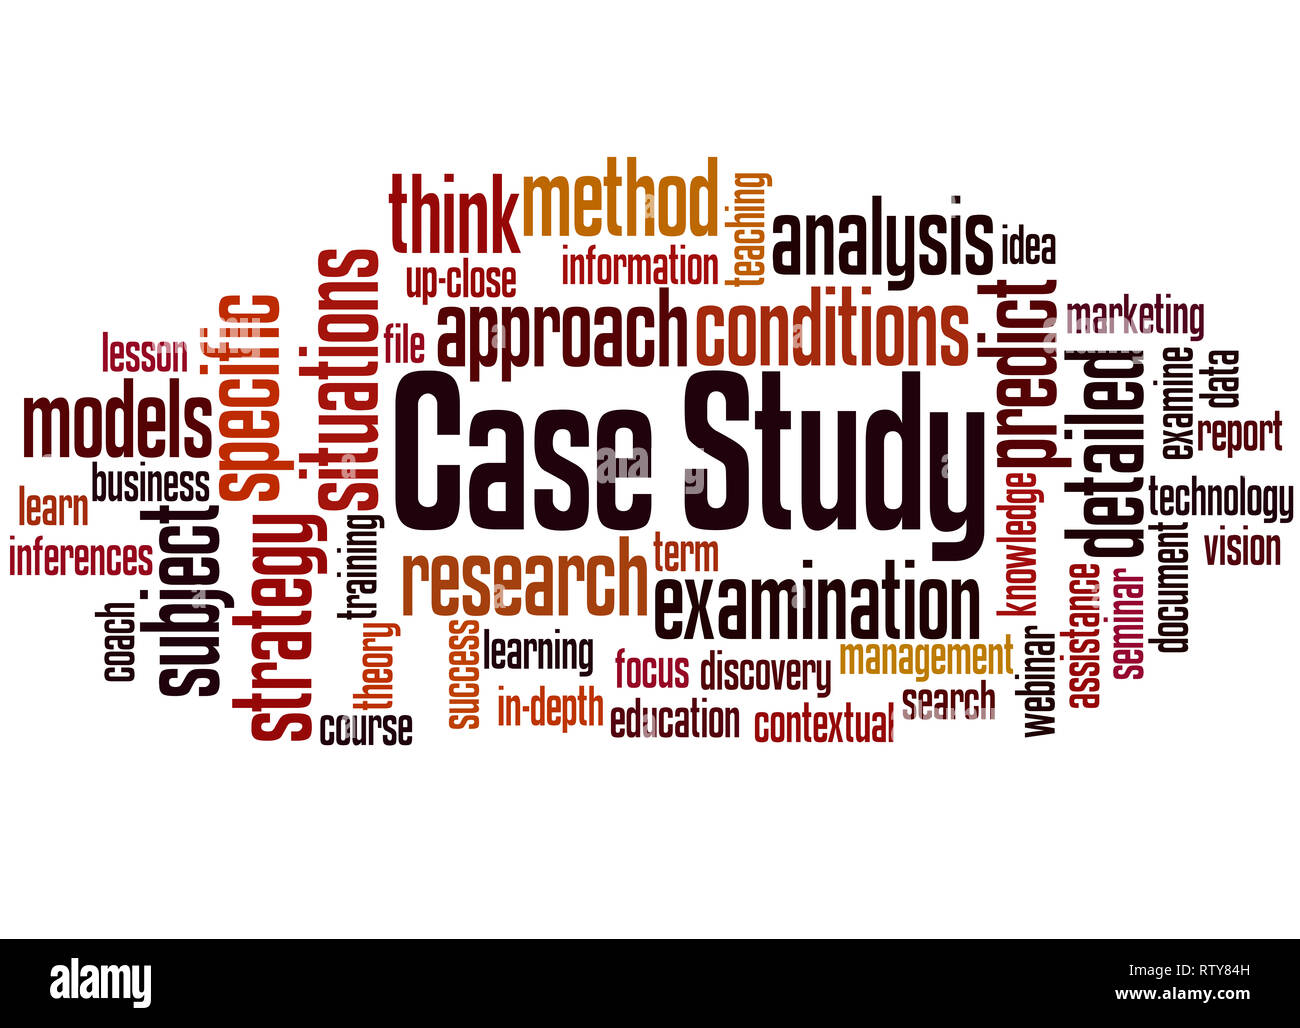 Case Study word cloud concept on white background. Stock Photo